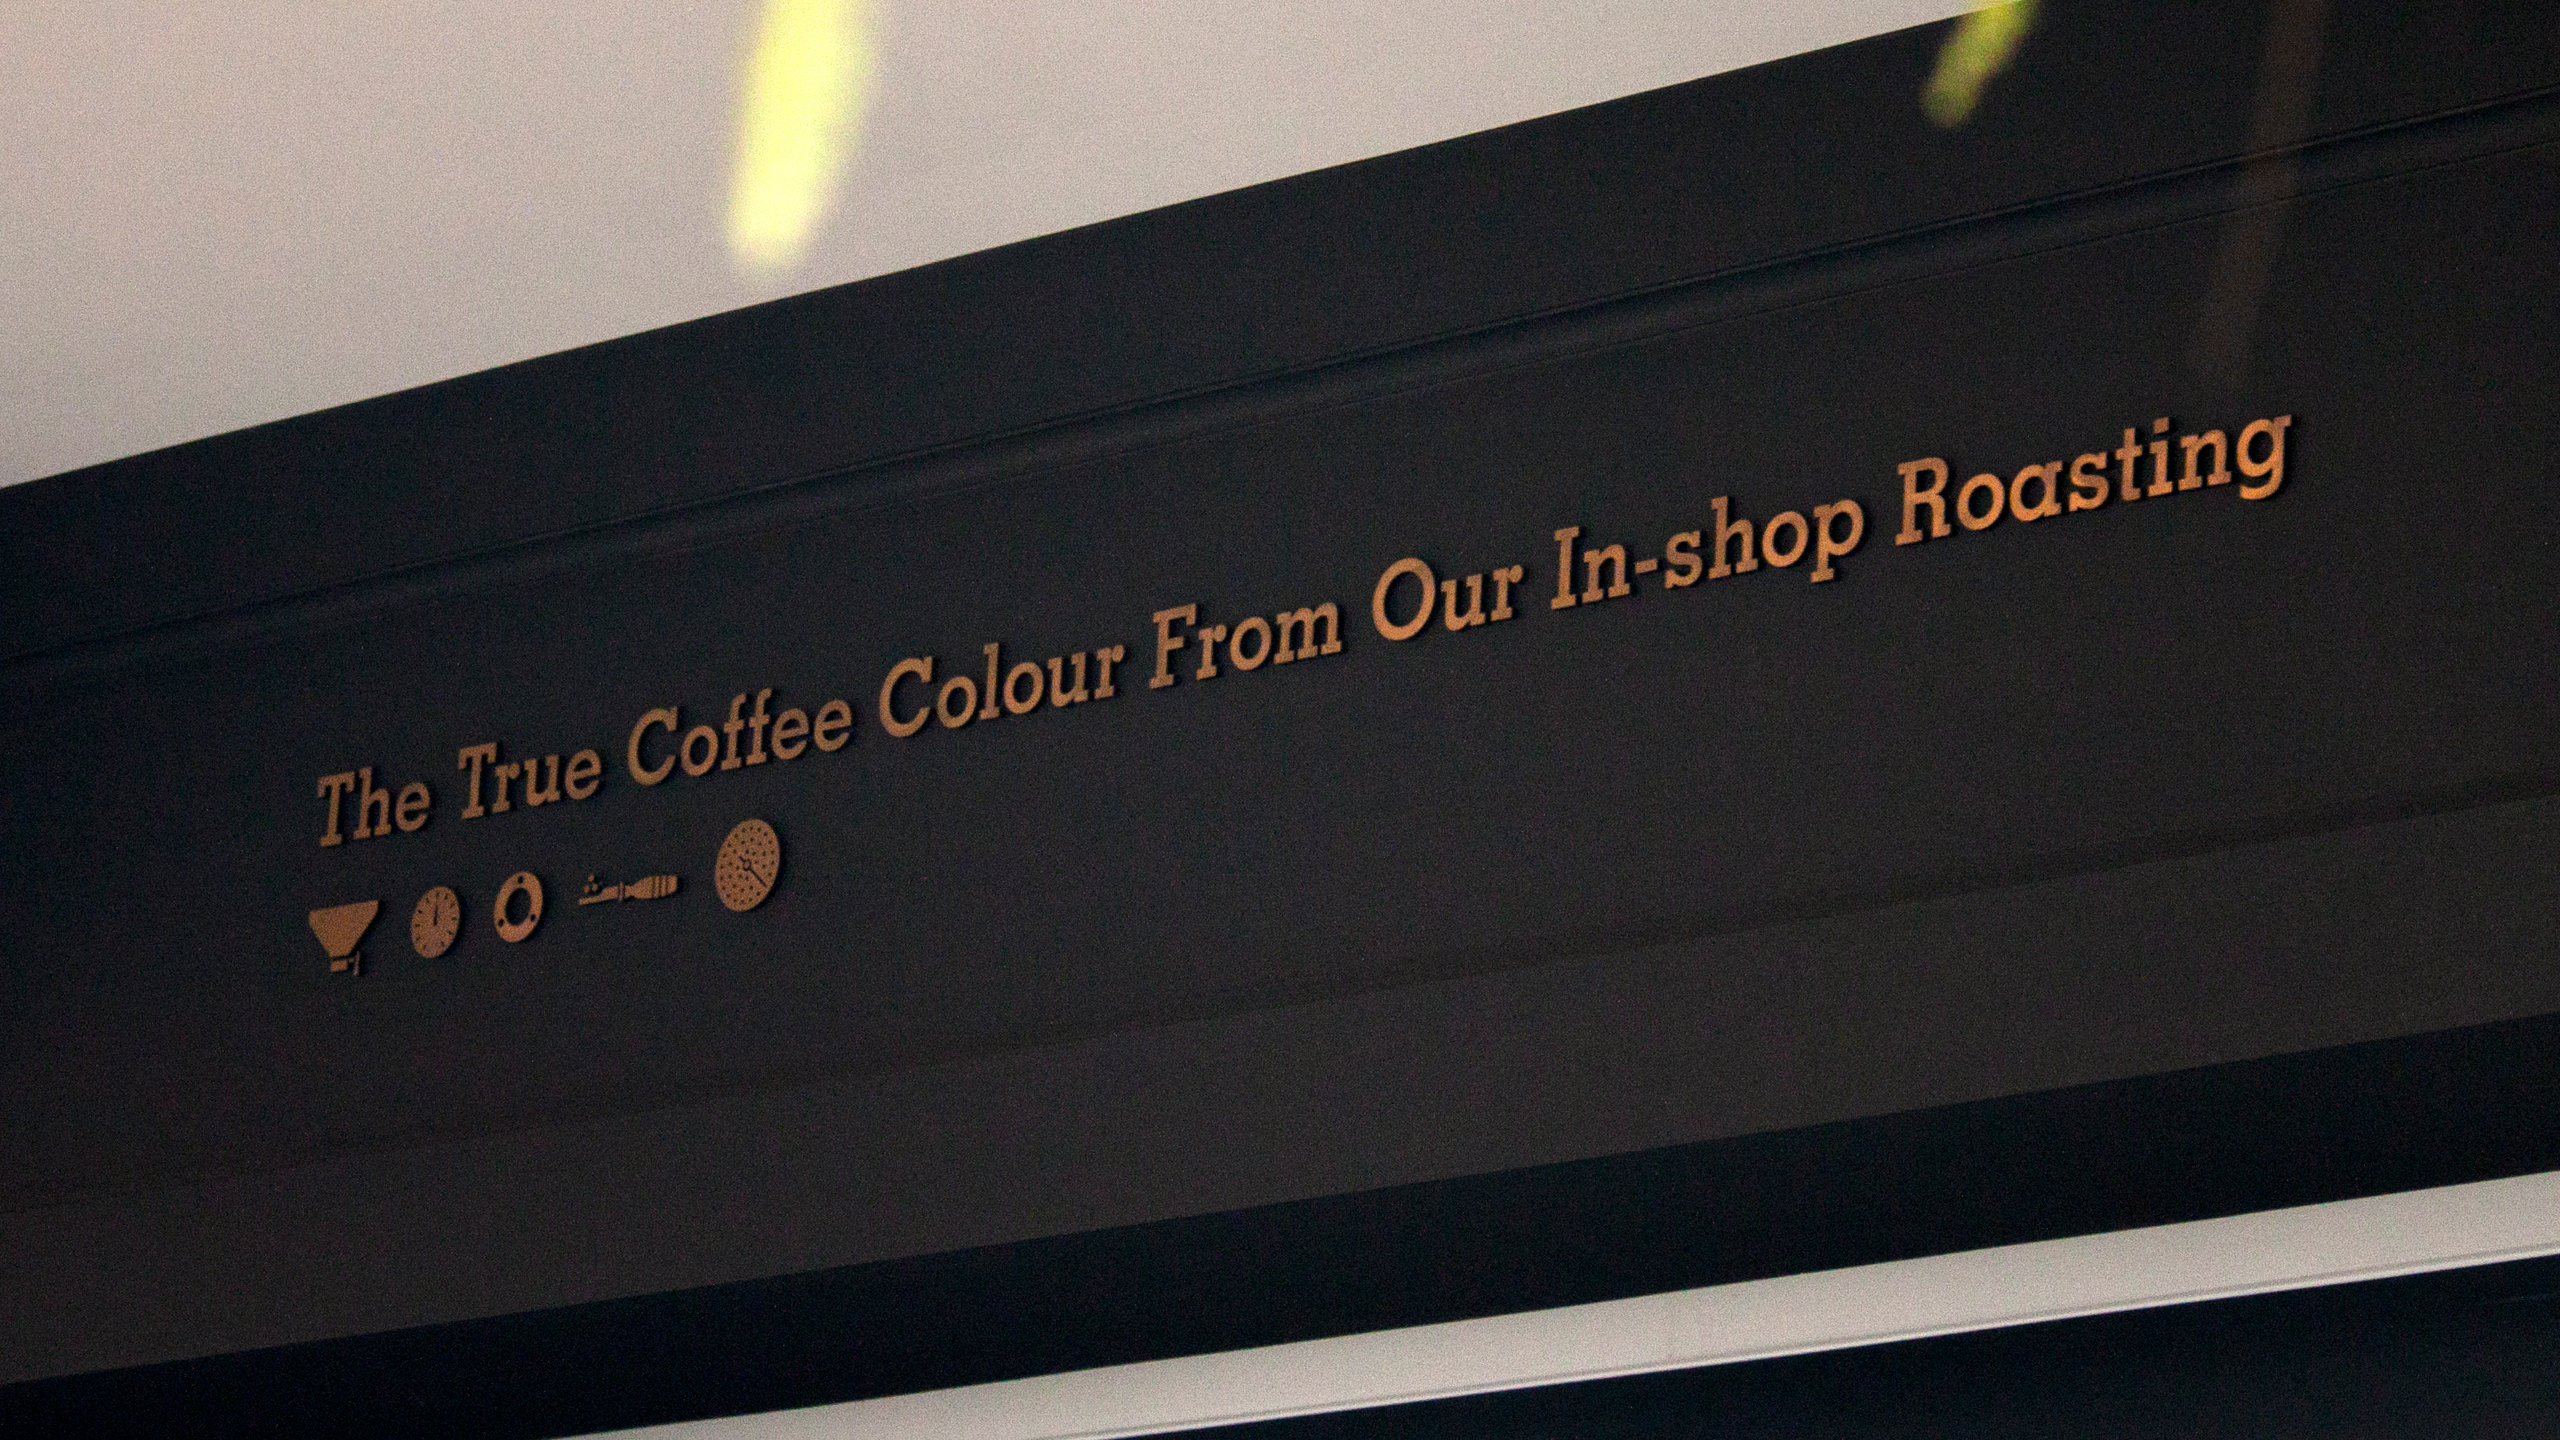 The True Coffee Colour From Our In-Shop Roasting